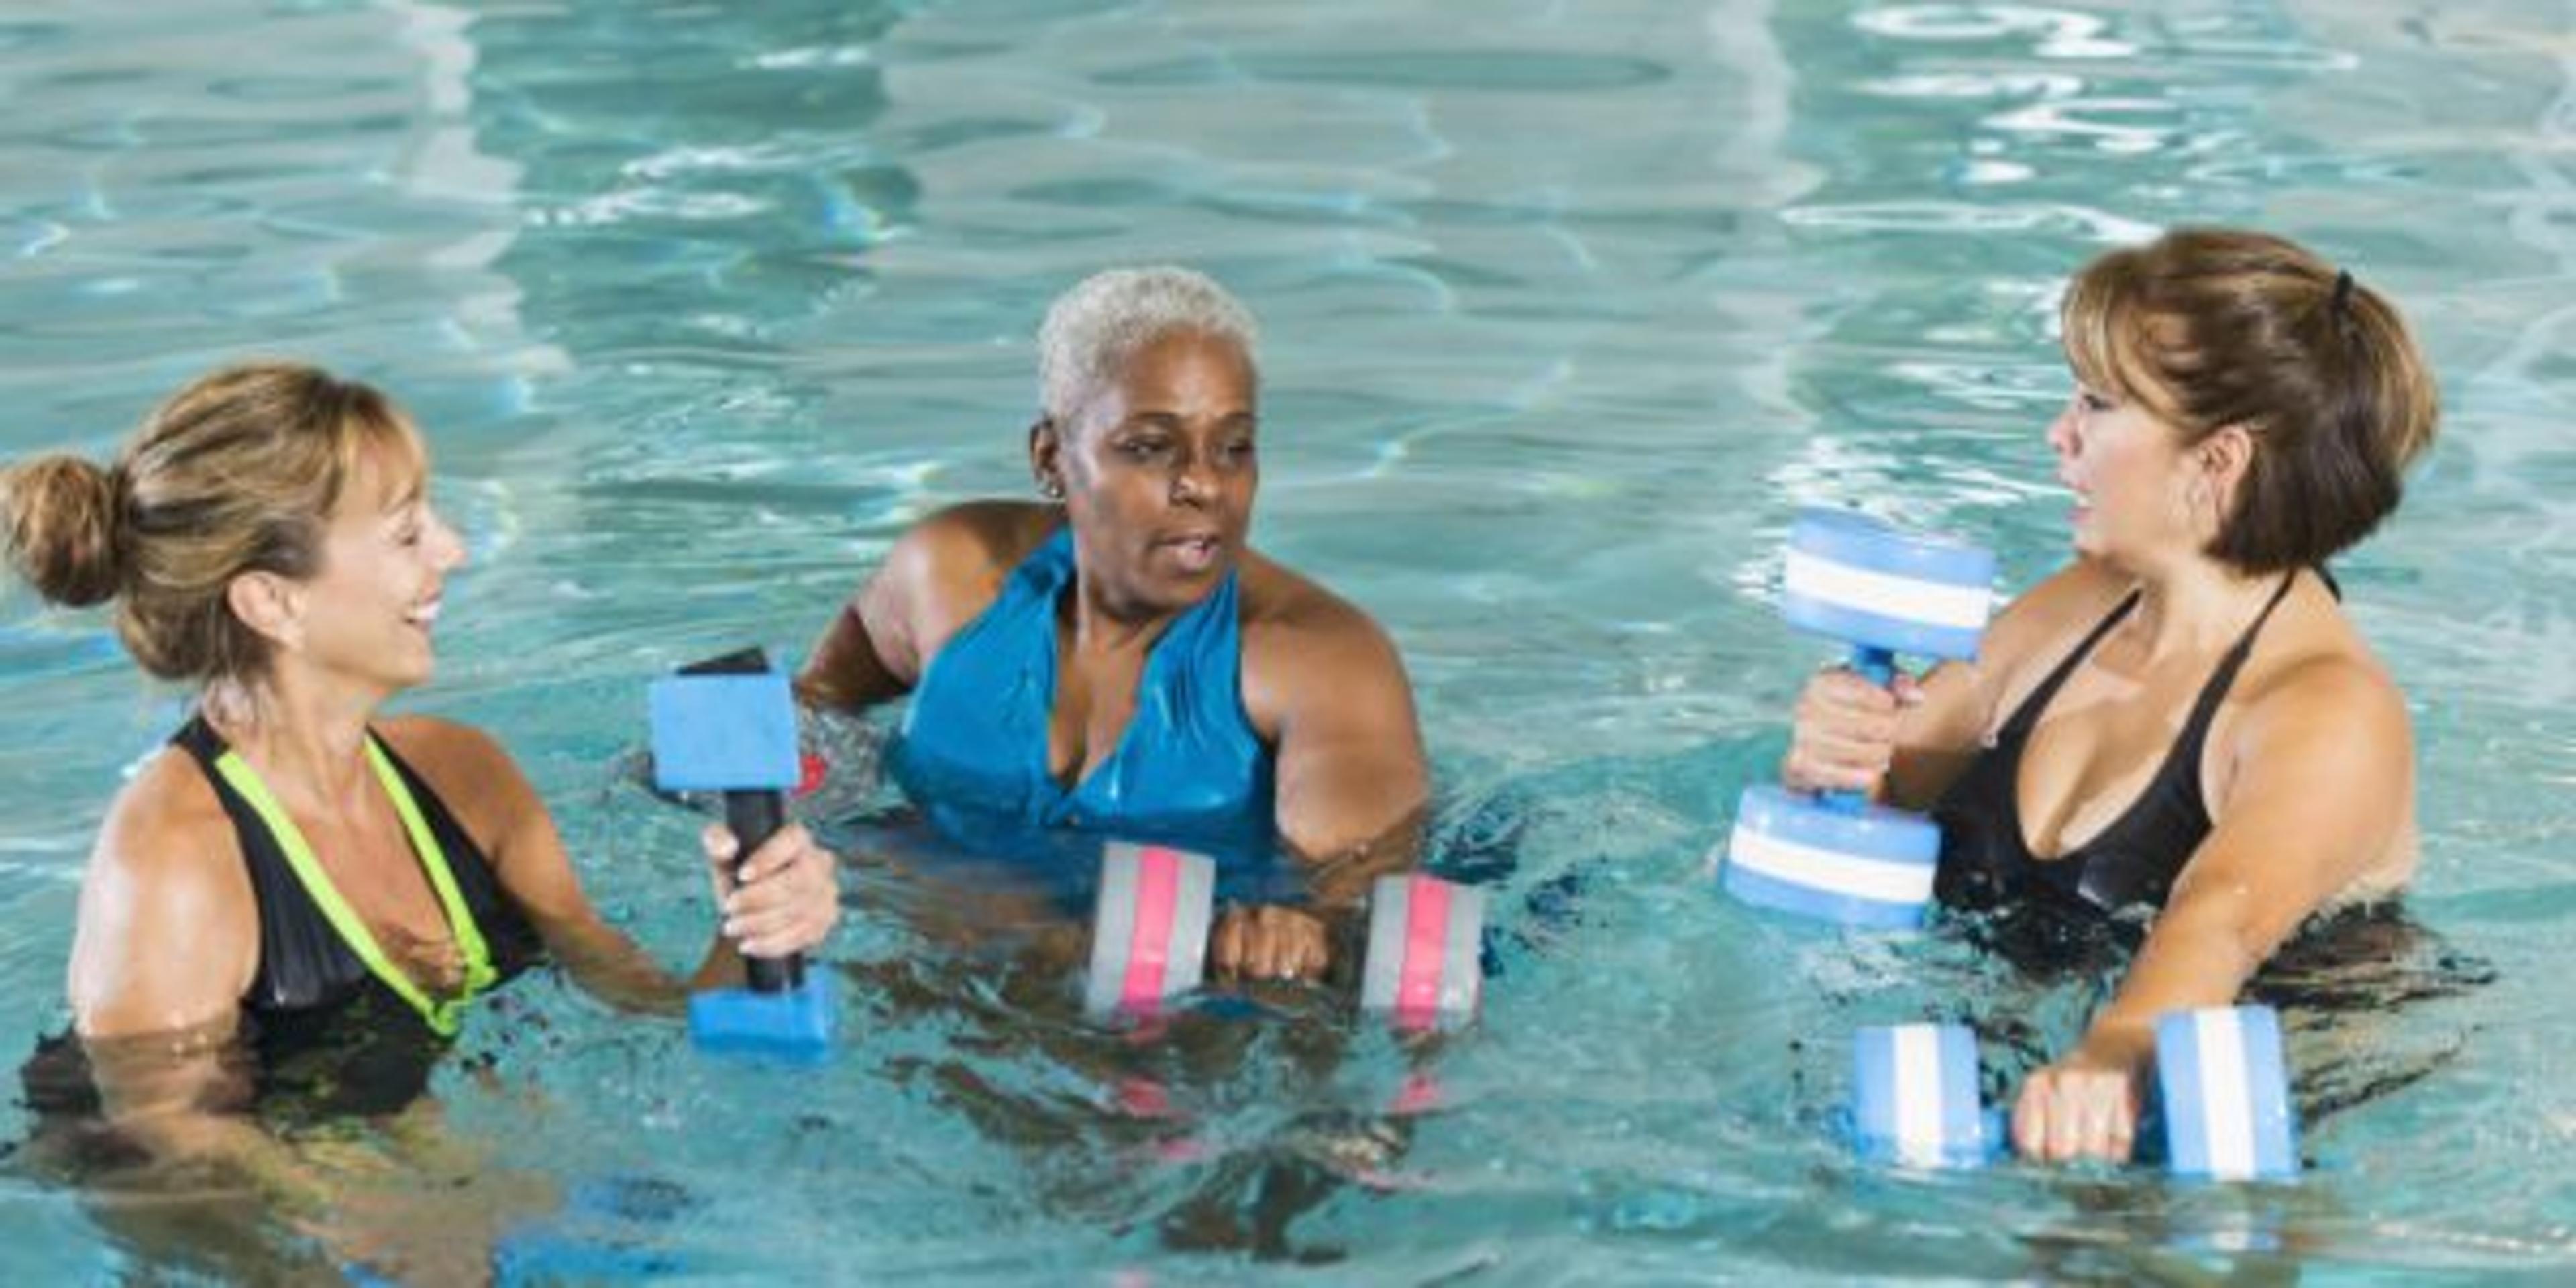 Multi-ethnic group of three middle aged and senior women (50s, 60s) doing water aerobics exercises with dumbbells in a swimming pool. Two of the women have serious expressions on their faces and the third is smiling.